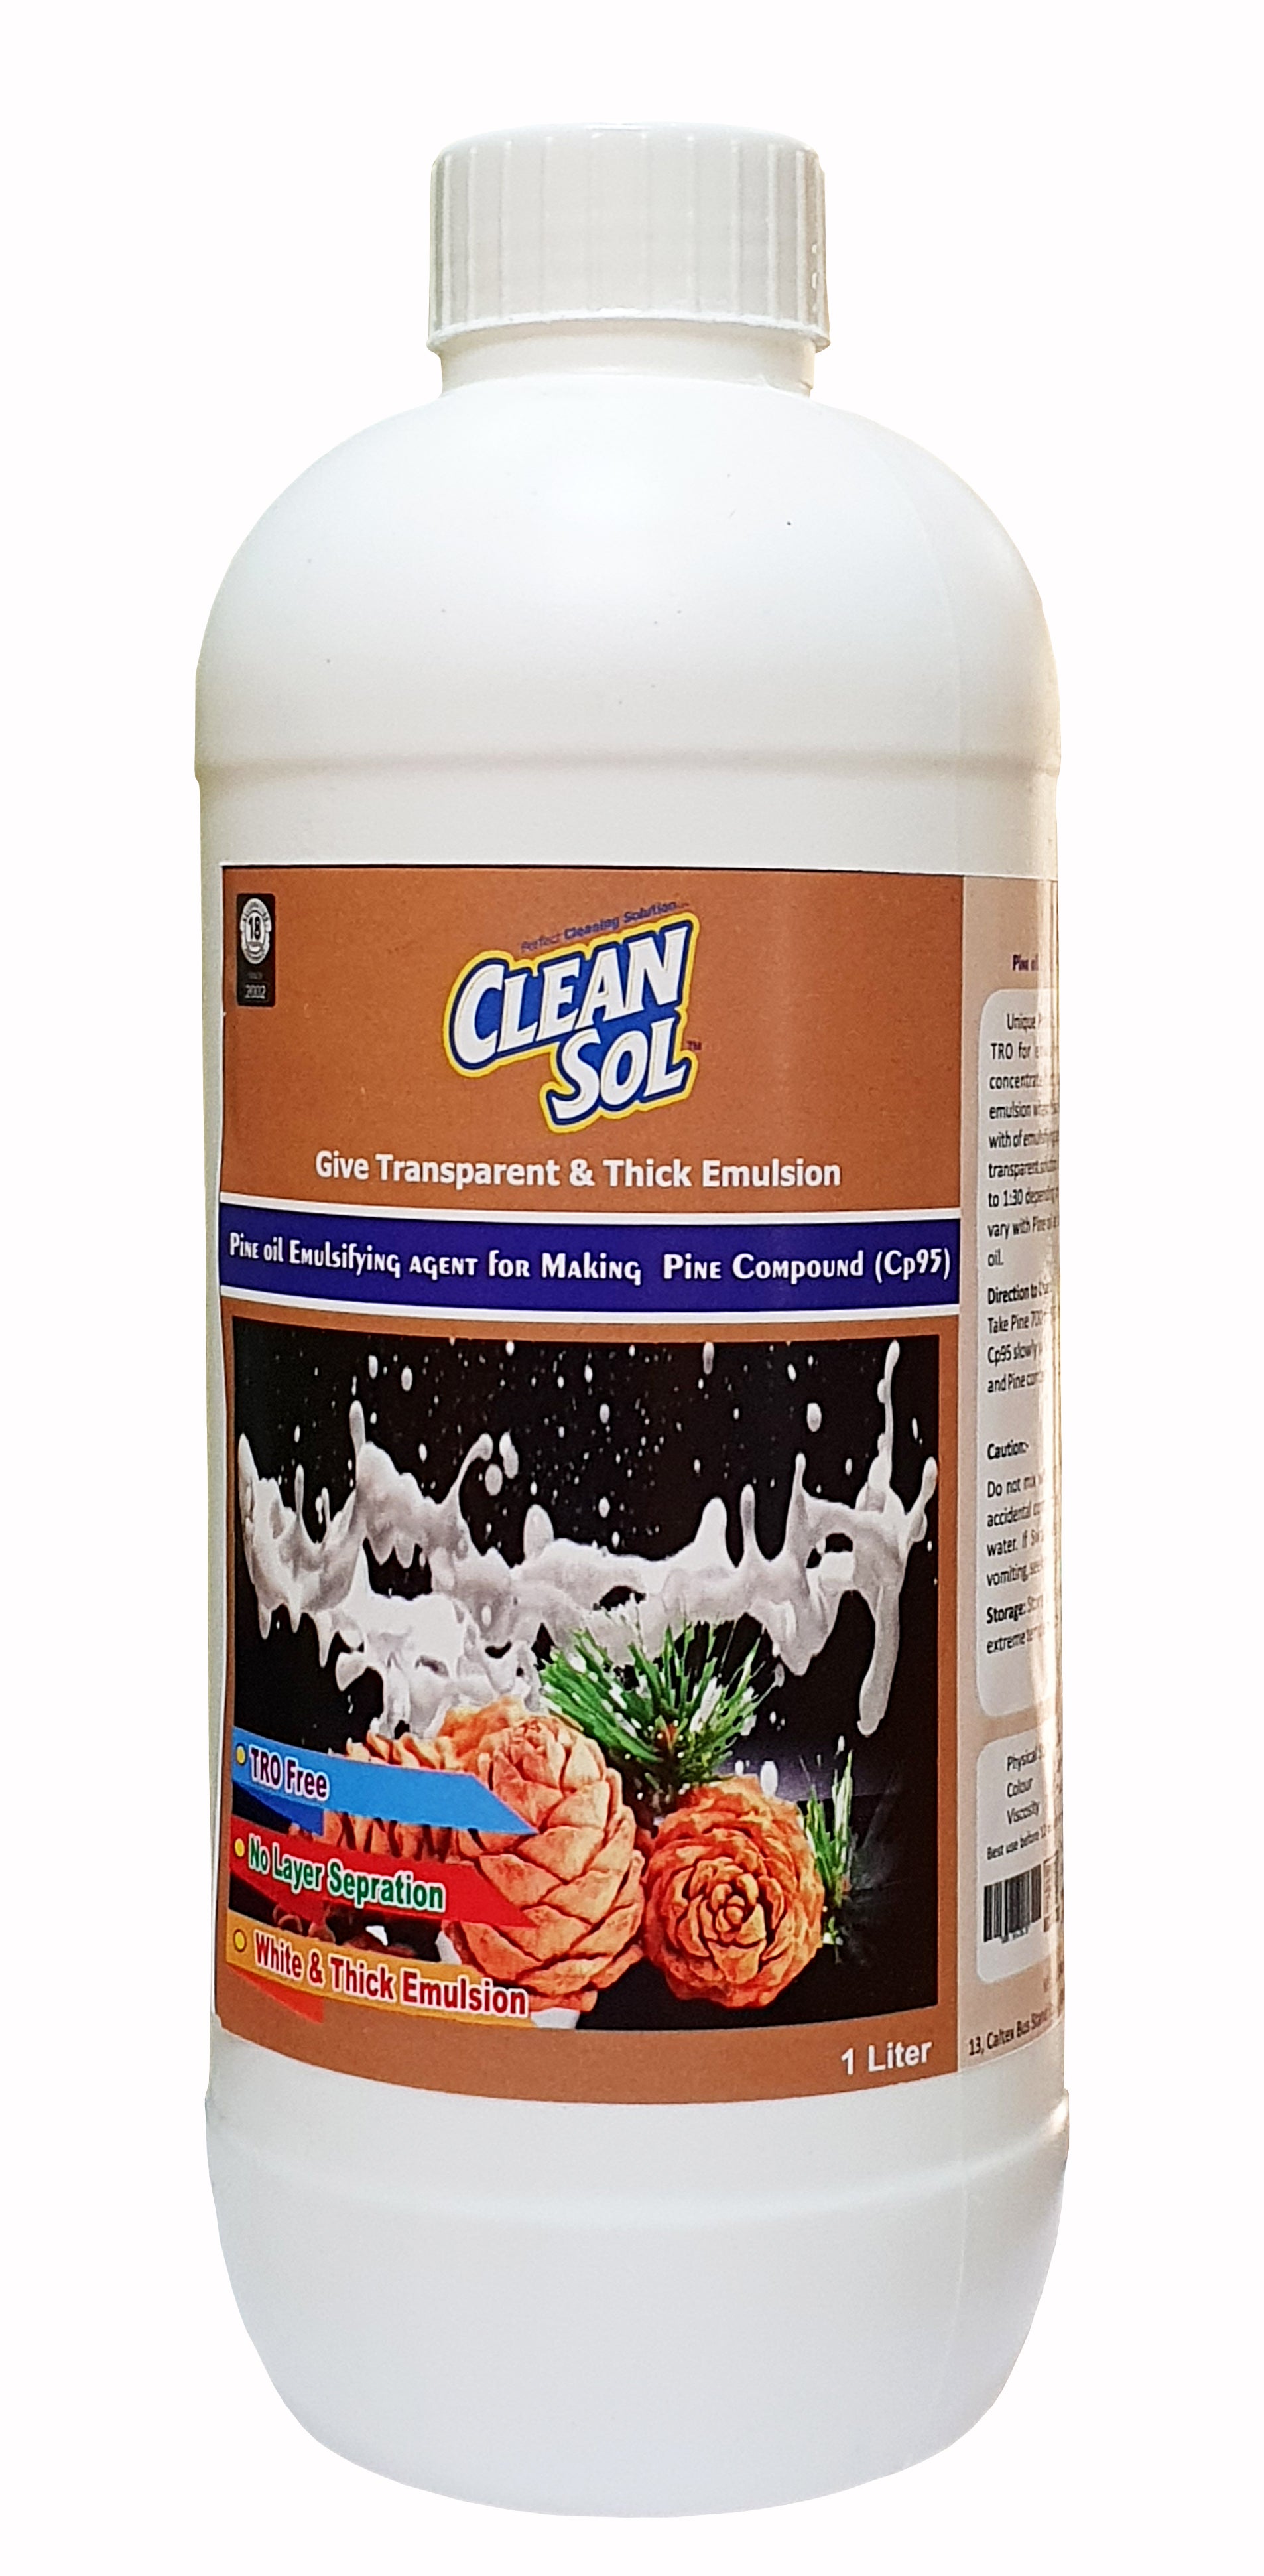 Cleansol Pine oil Emulsifying agent for making Pine-Phenyl Compound (CP95)